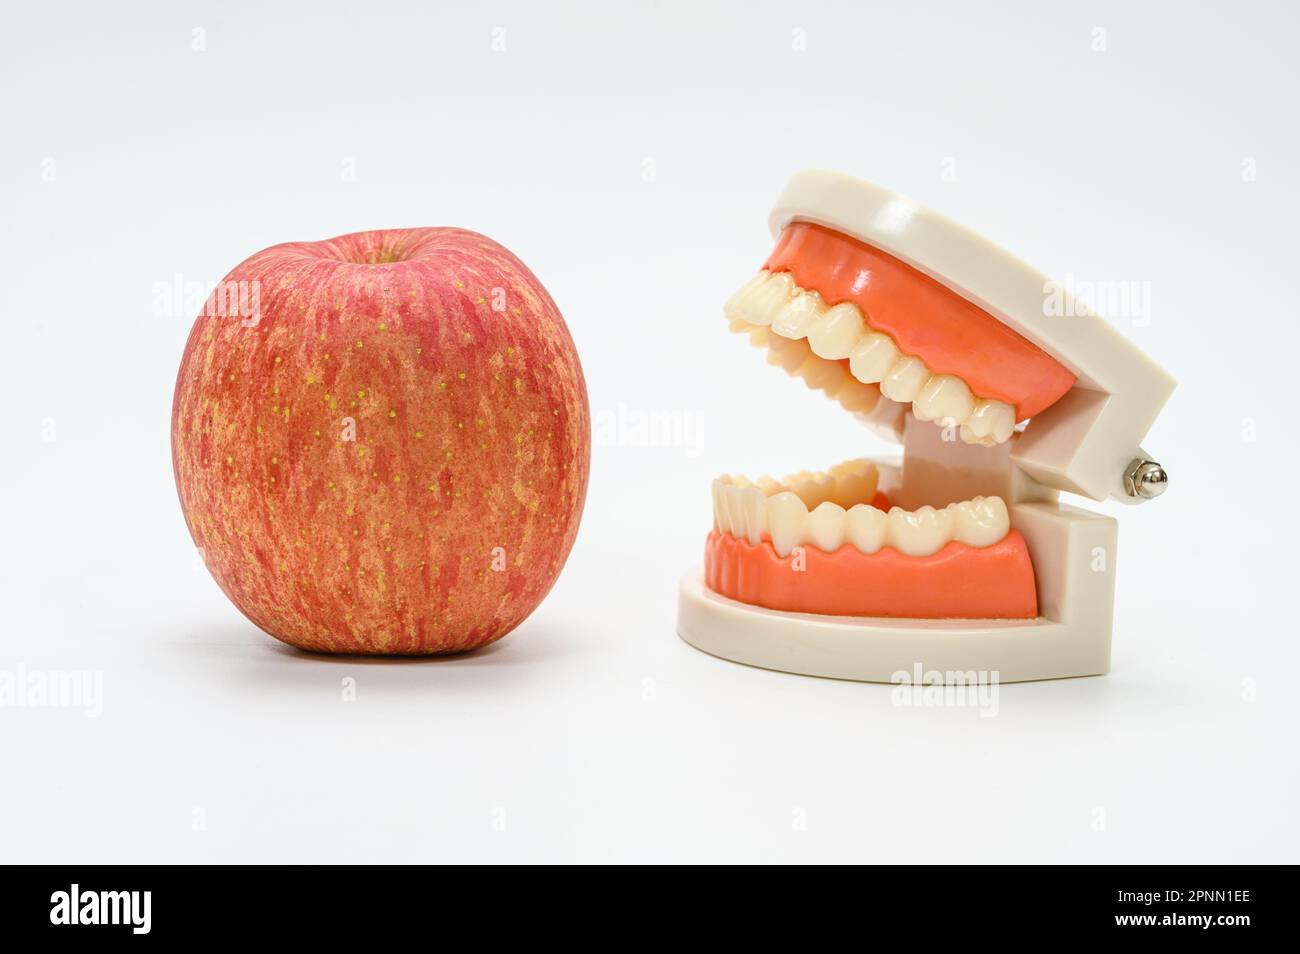 Tooth model and a ripe apple on a white background Stock Photo